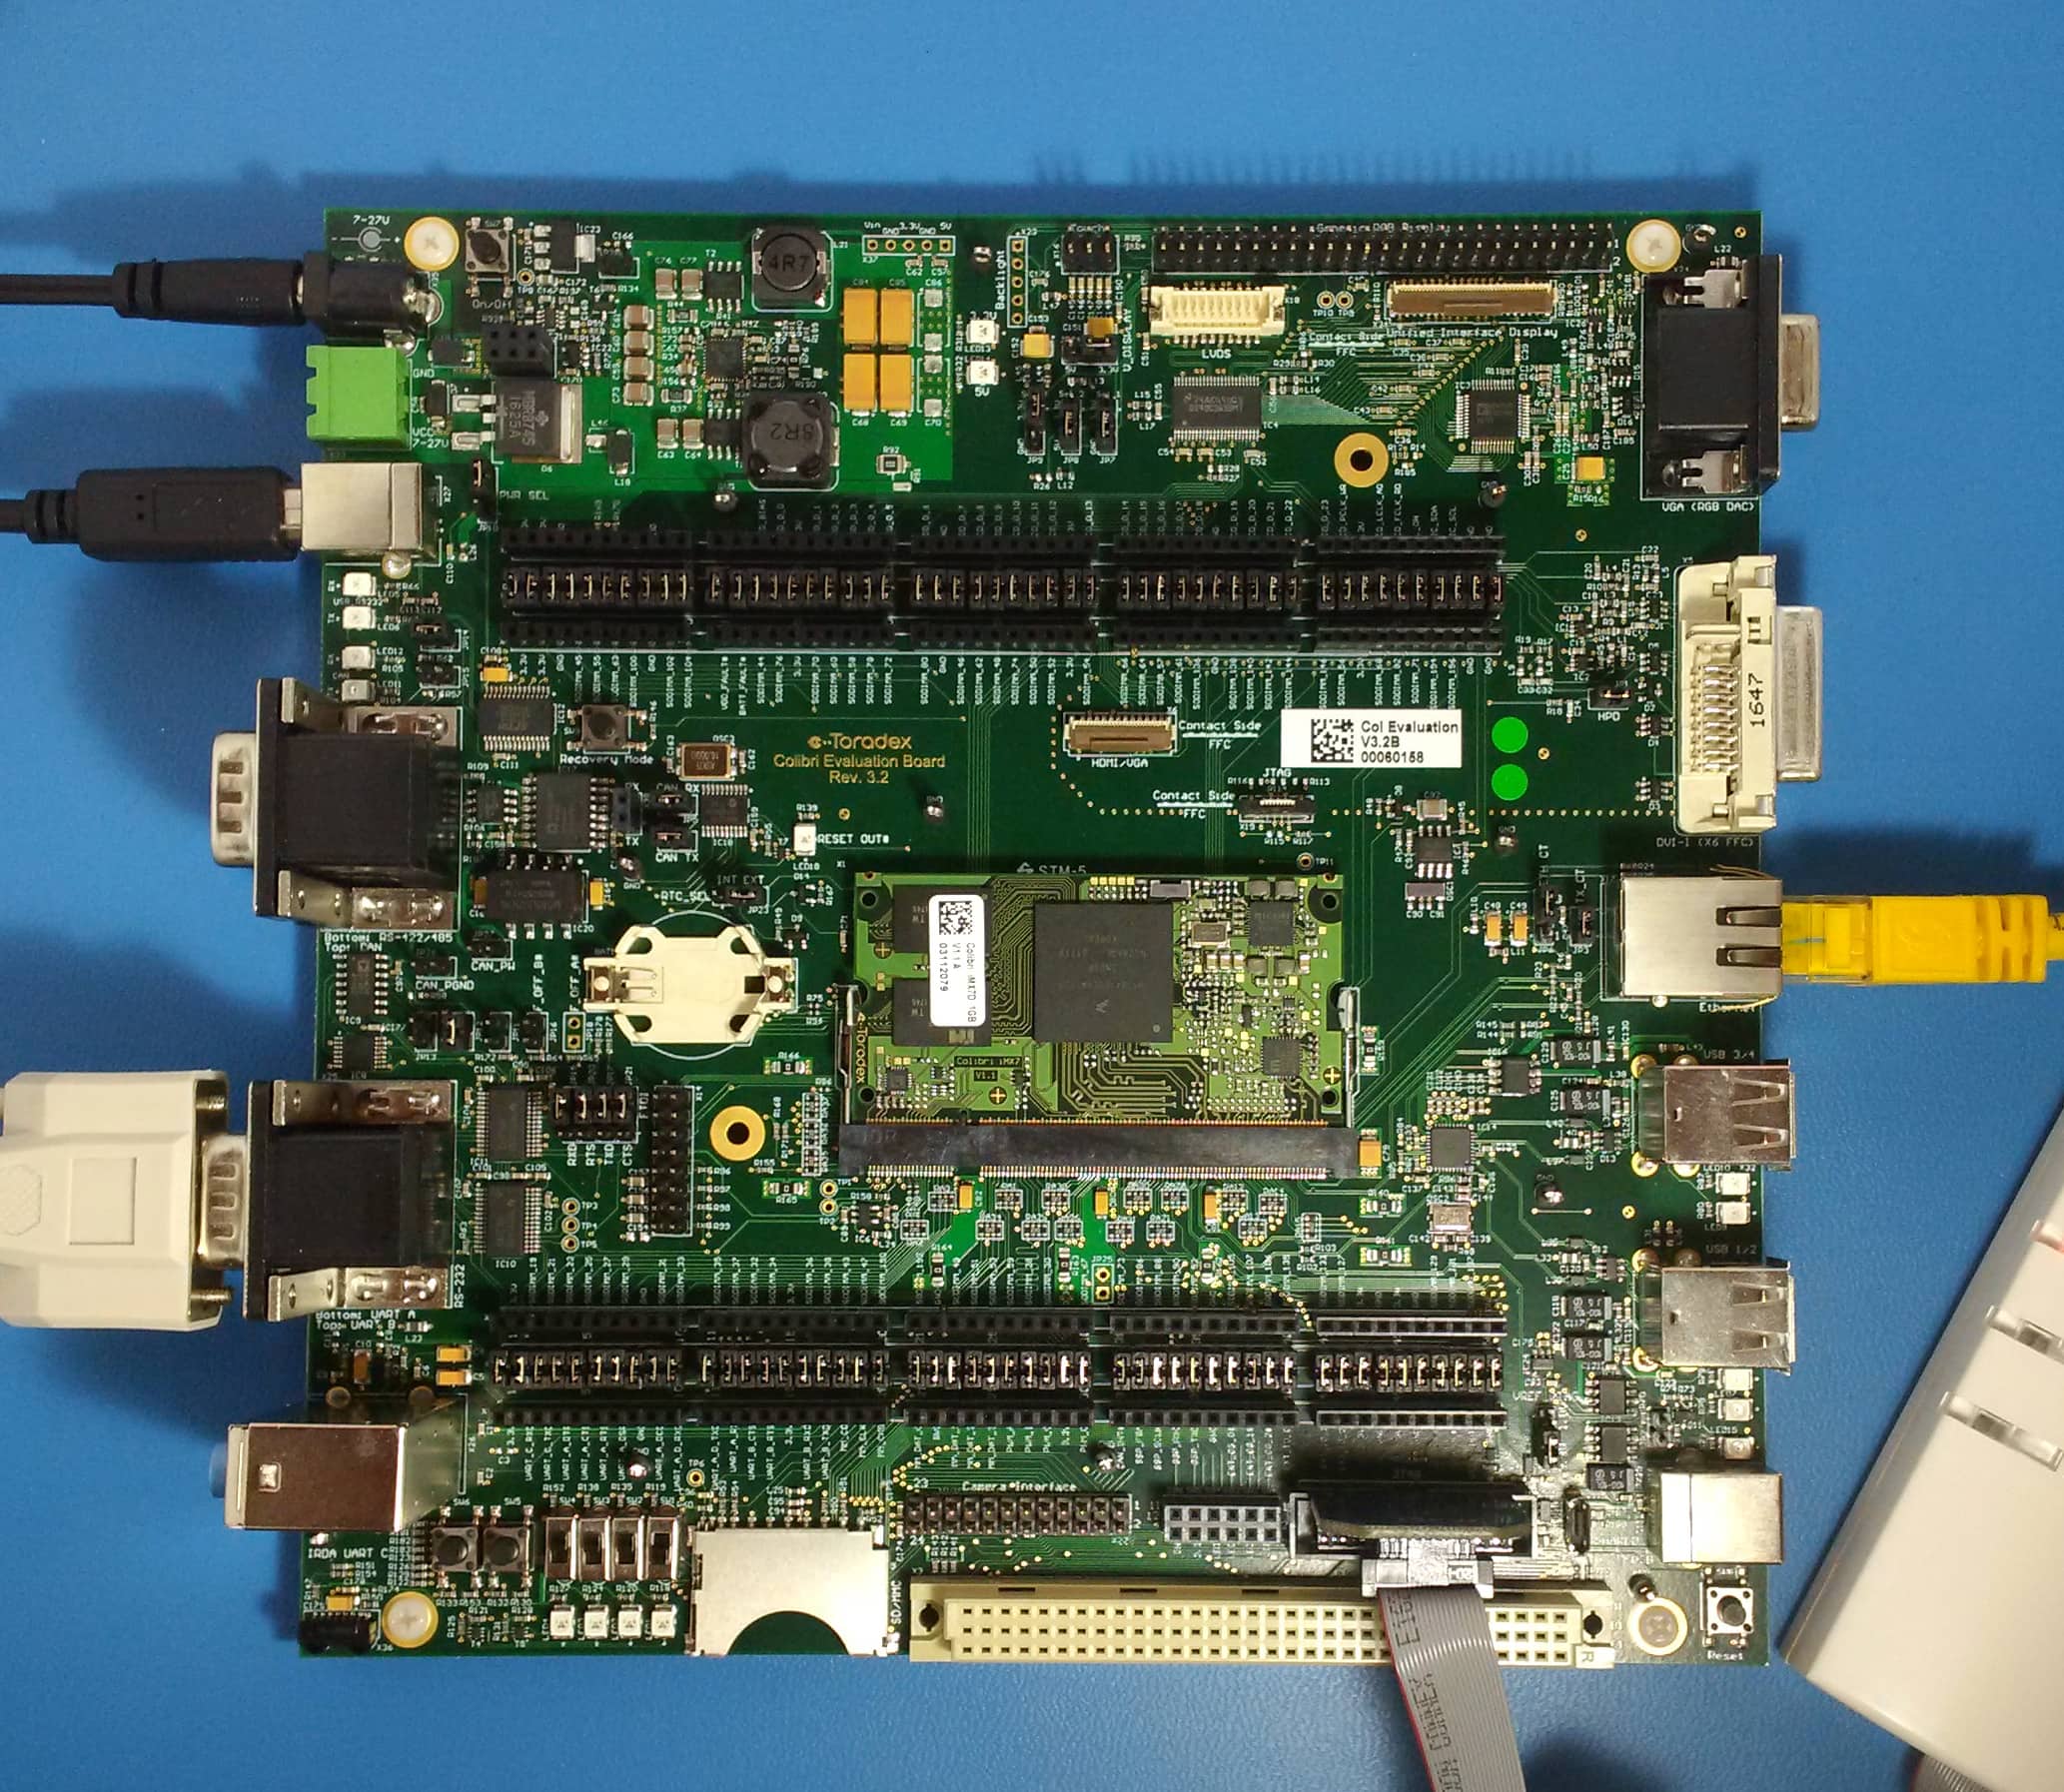 Toradex Colibri Carrier Board with Ethernet, serial, JTAG and USB cables connected.